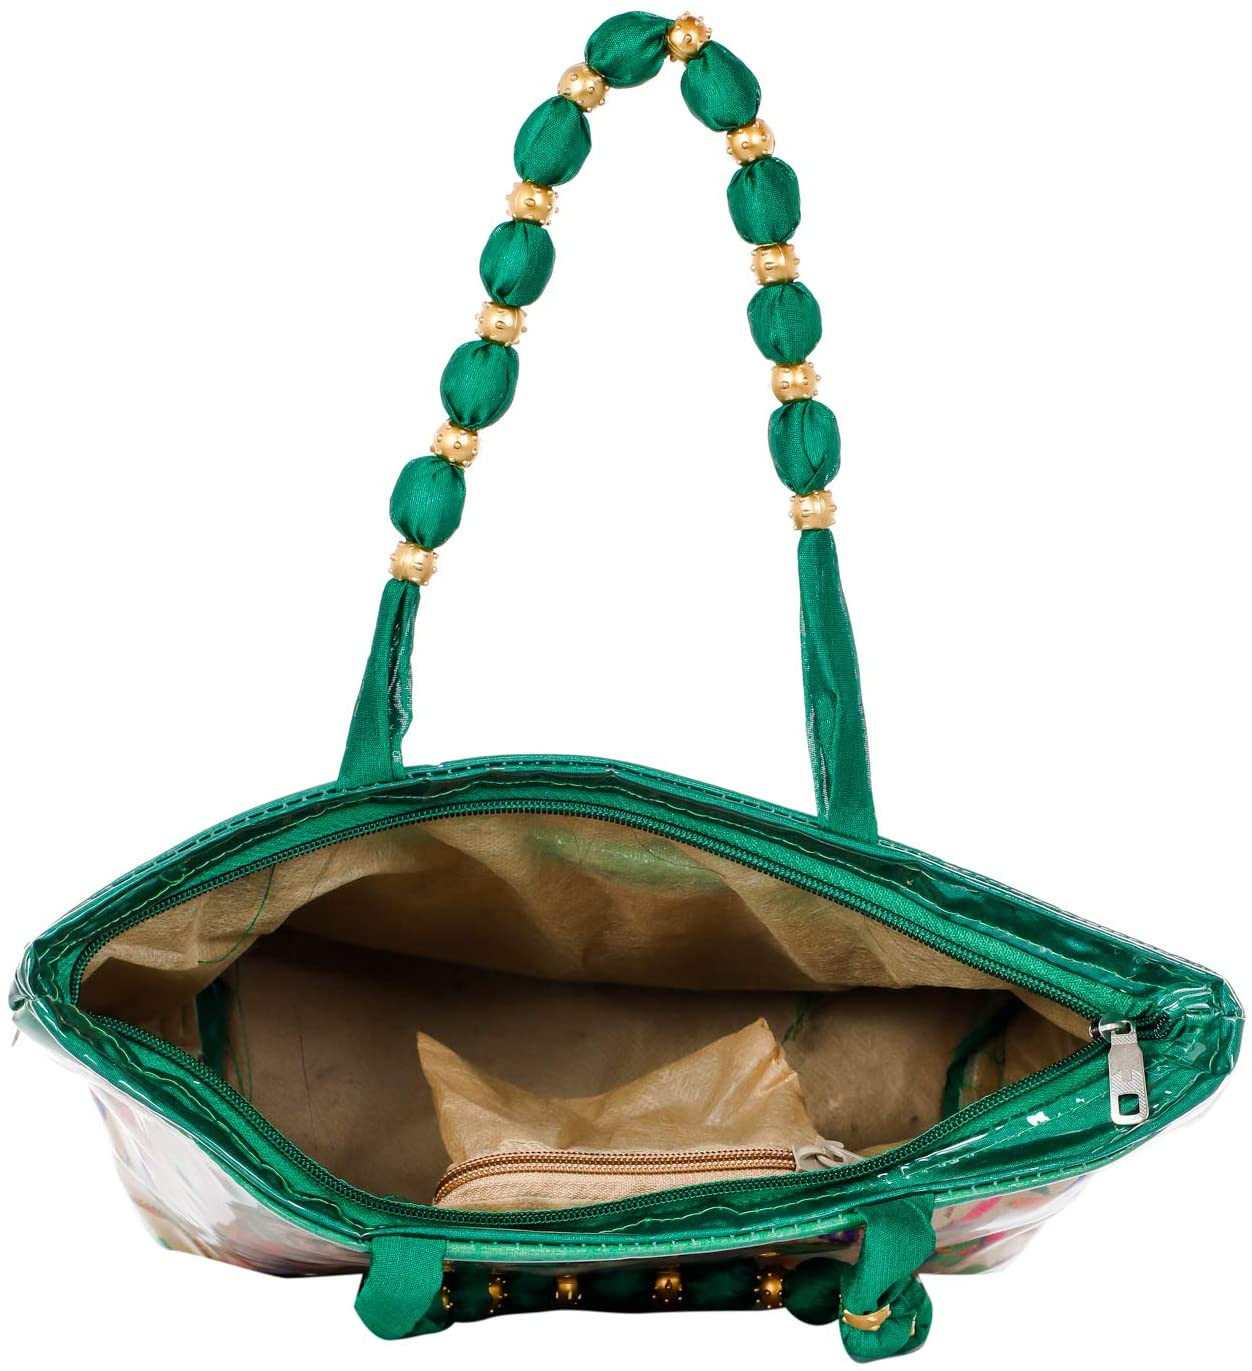 Kuber Industries Laminated Embroidery Hand Bag, Tote Bag, Purse For All Occasion For Women & Girls (Green)